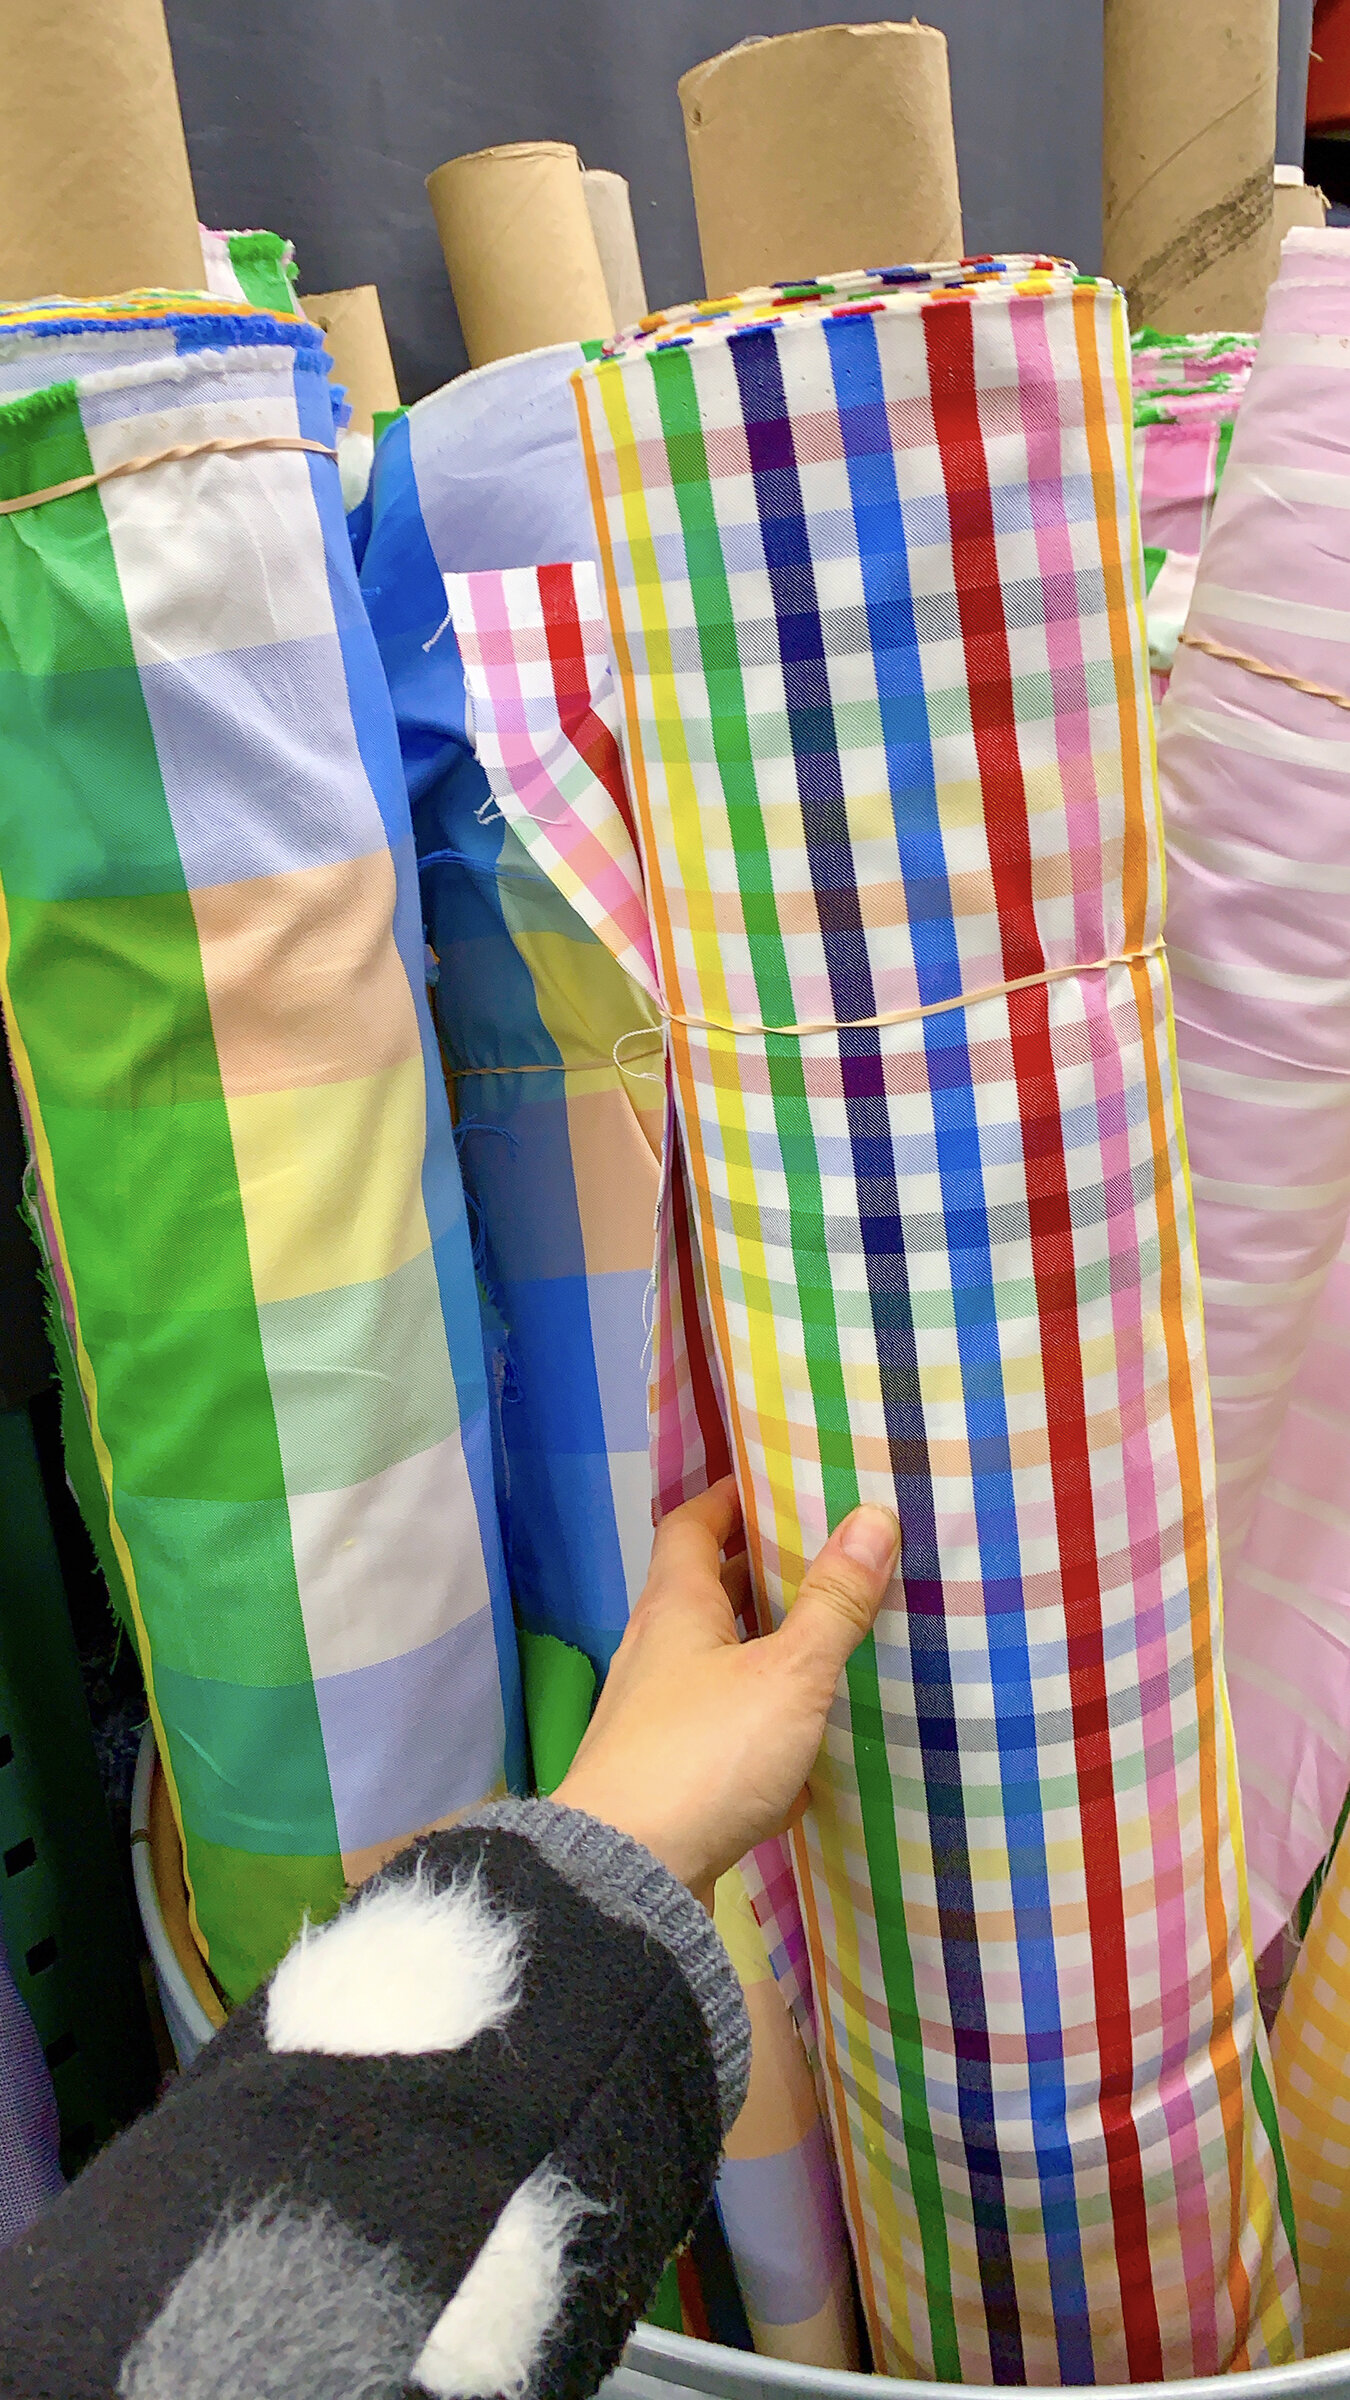 Nyc Garment District Fabric Shopping Guide Part 1 Top Tier Fabric Stores — Buried Diamond